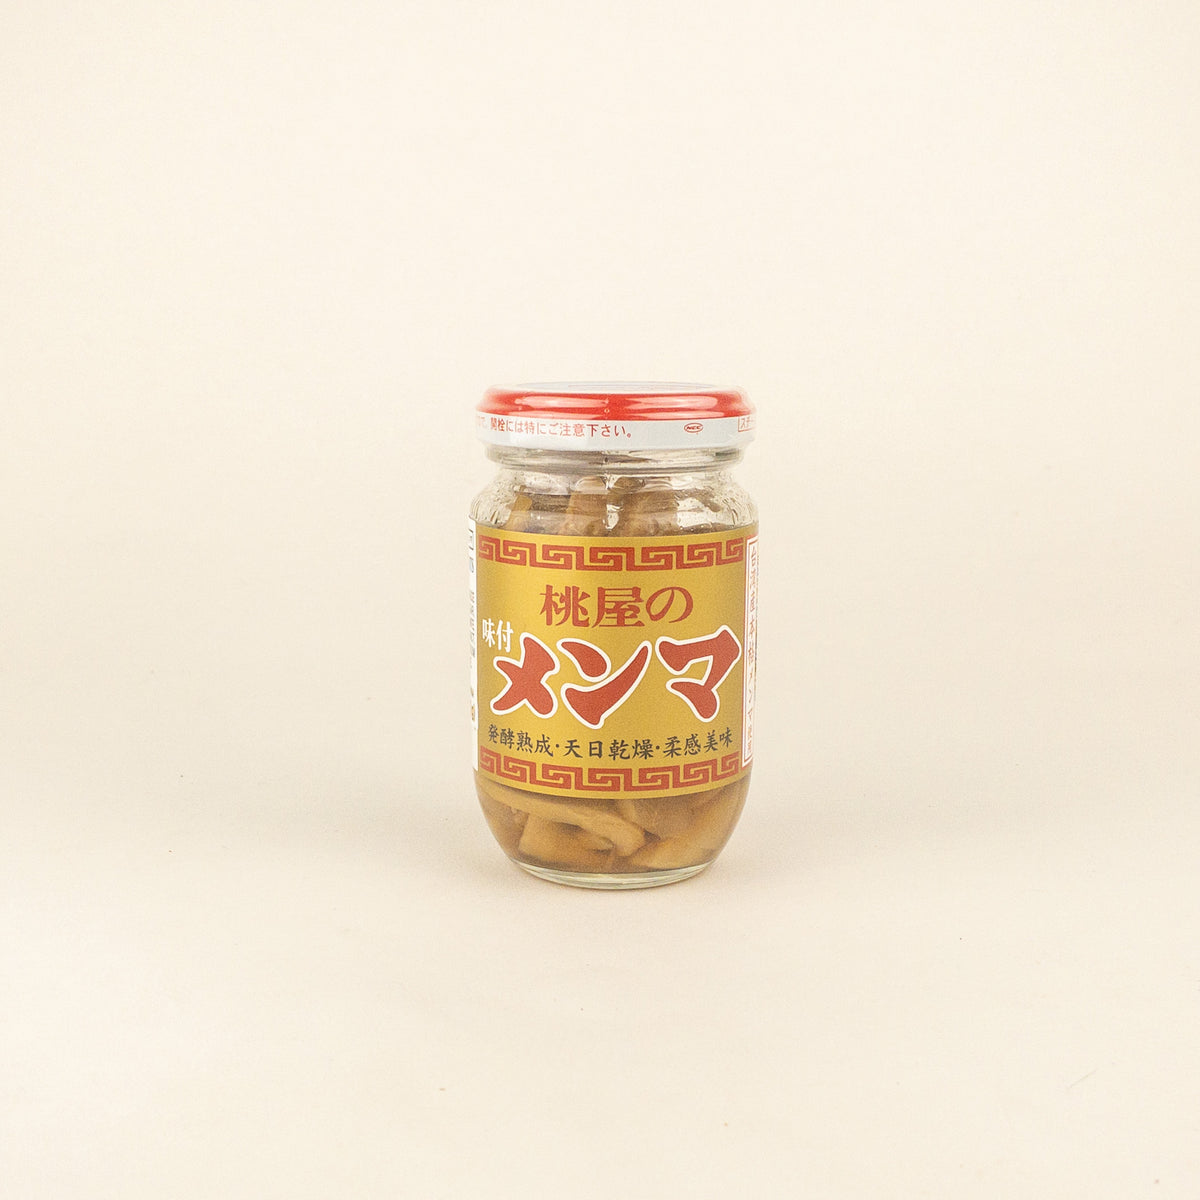 <!--1980--!>Menma Pickled Bamboo Shoots